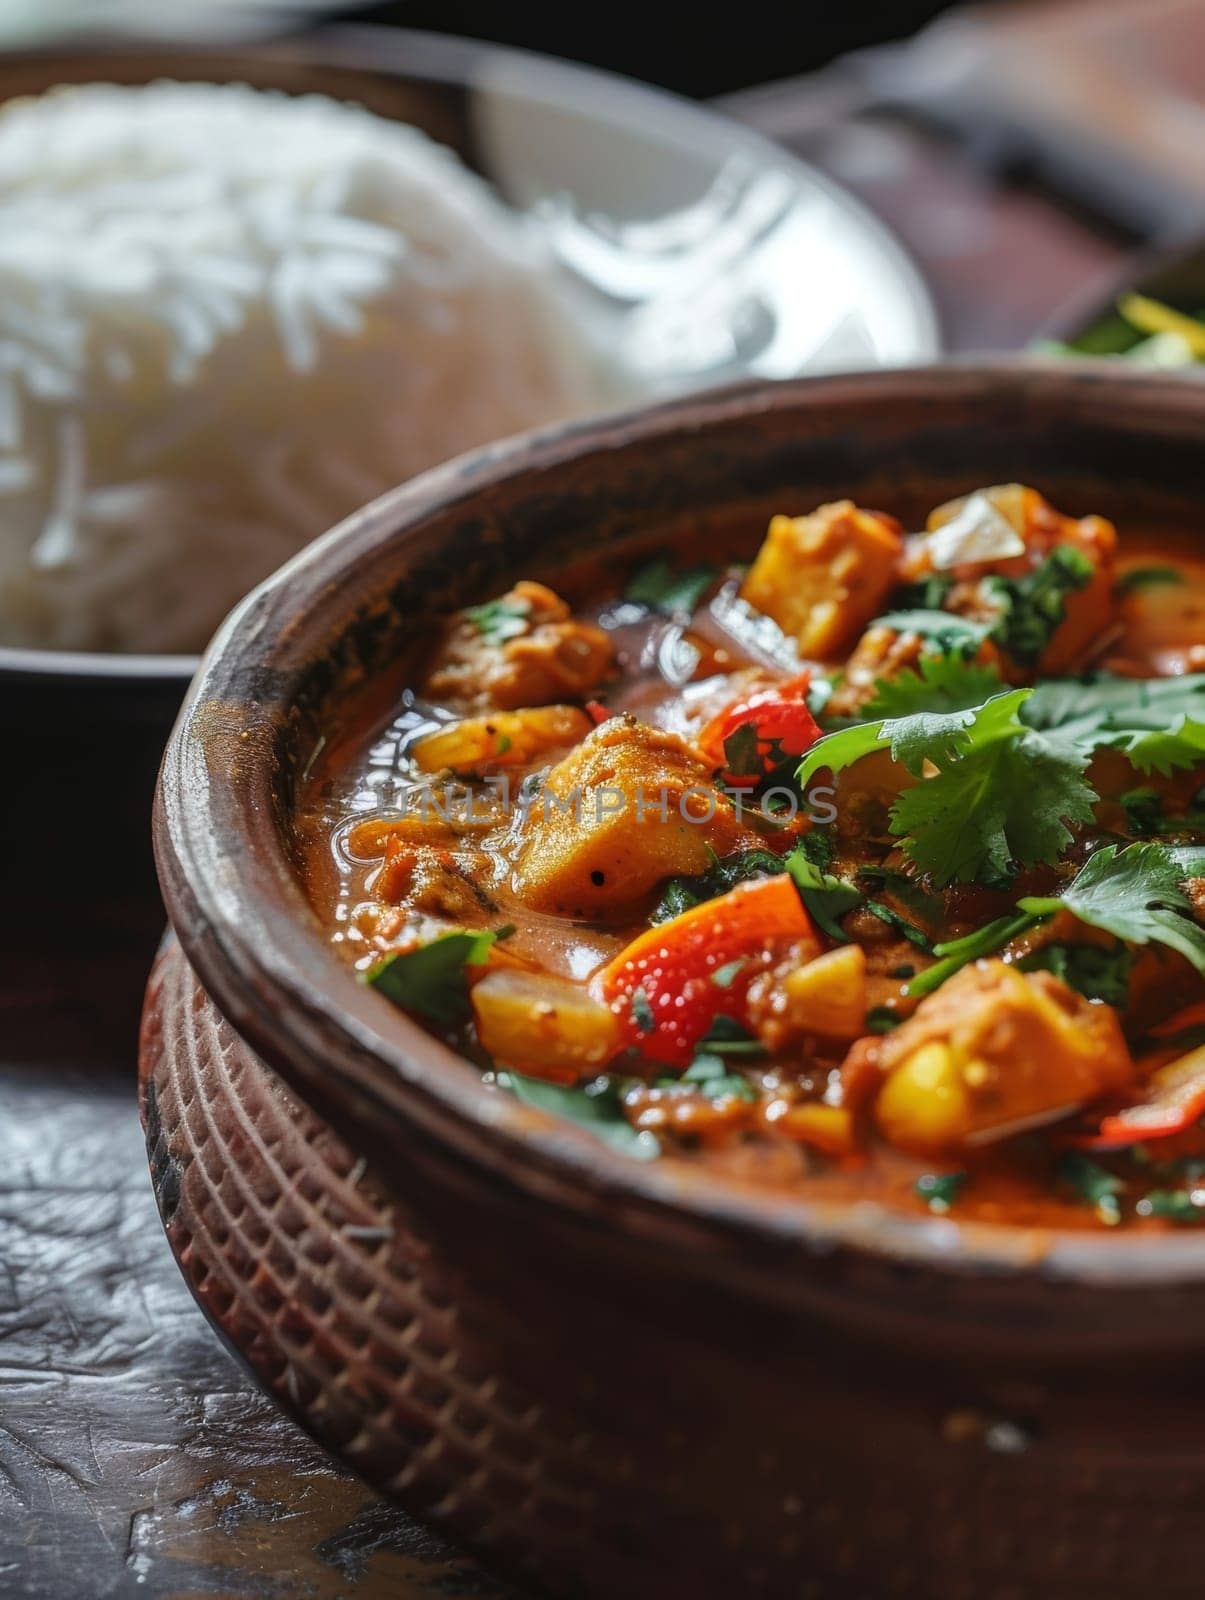 A close-up of a spicy and fragrant Indian curry, simmered to perfection in a traditional clay pot and served alongside fluffy basmati rice, showcasing the bold flavors and authentic of Indian cuisine